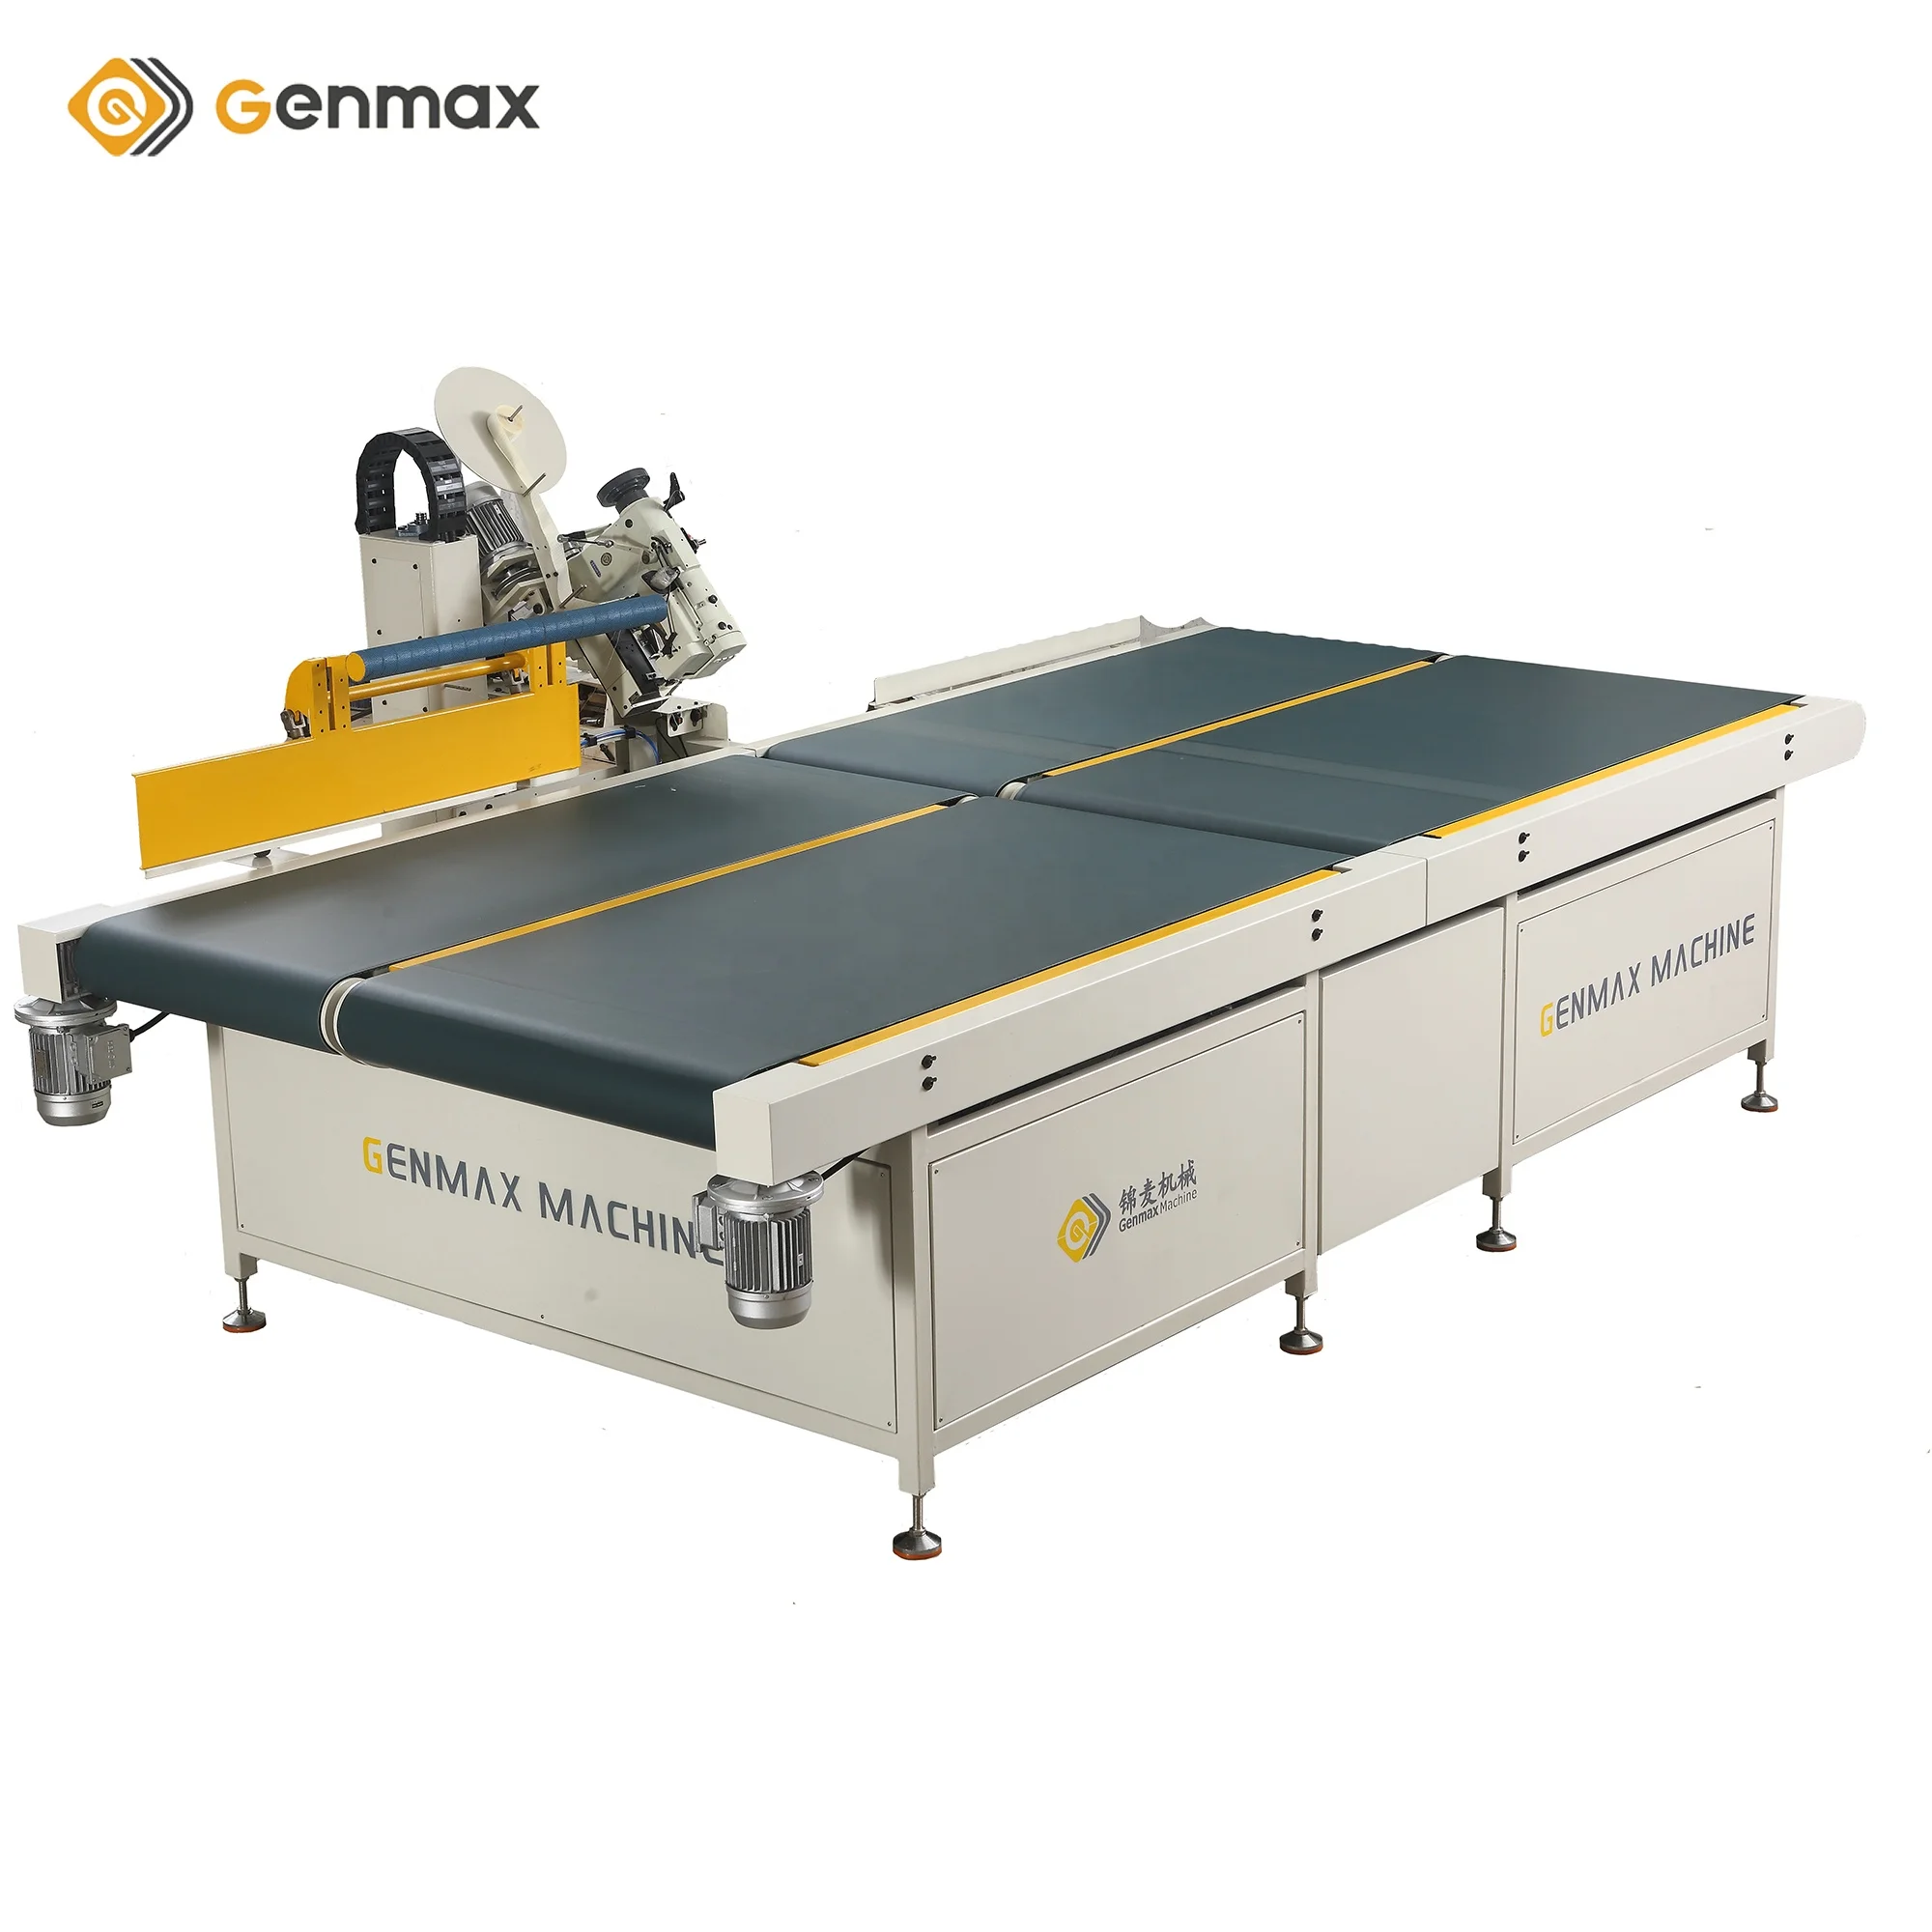 Fully Automatic flipping Mattress Tape Edge Machine Original Sewing Head For Mquina De Coser Colchones